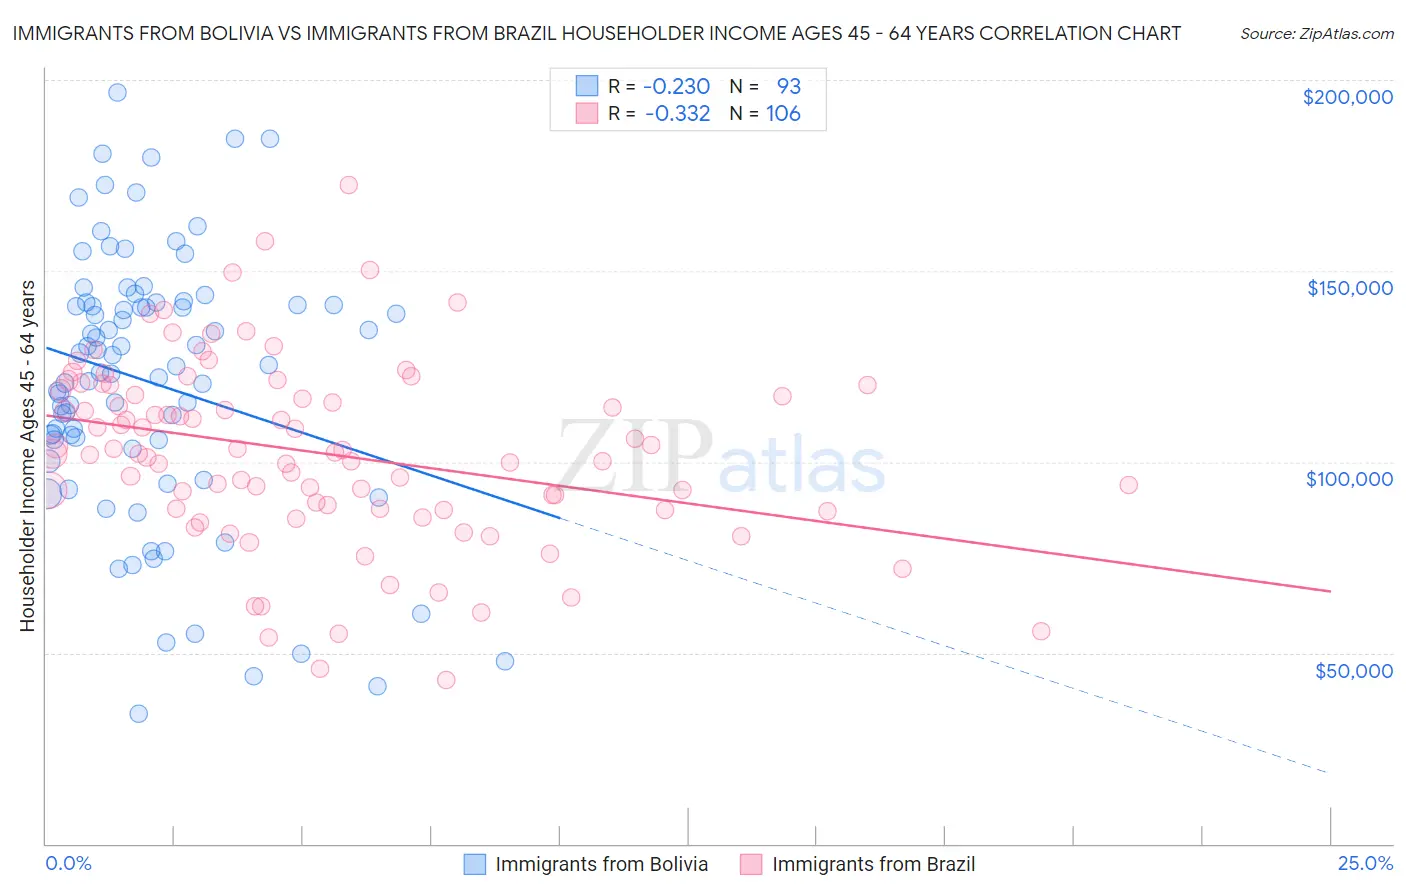 Immigrants from Bolivia vs Immigrants from Brazil Householder Income Ages 45 - 64 years